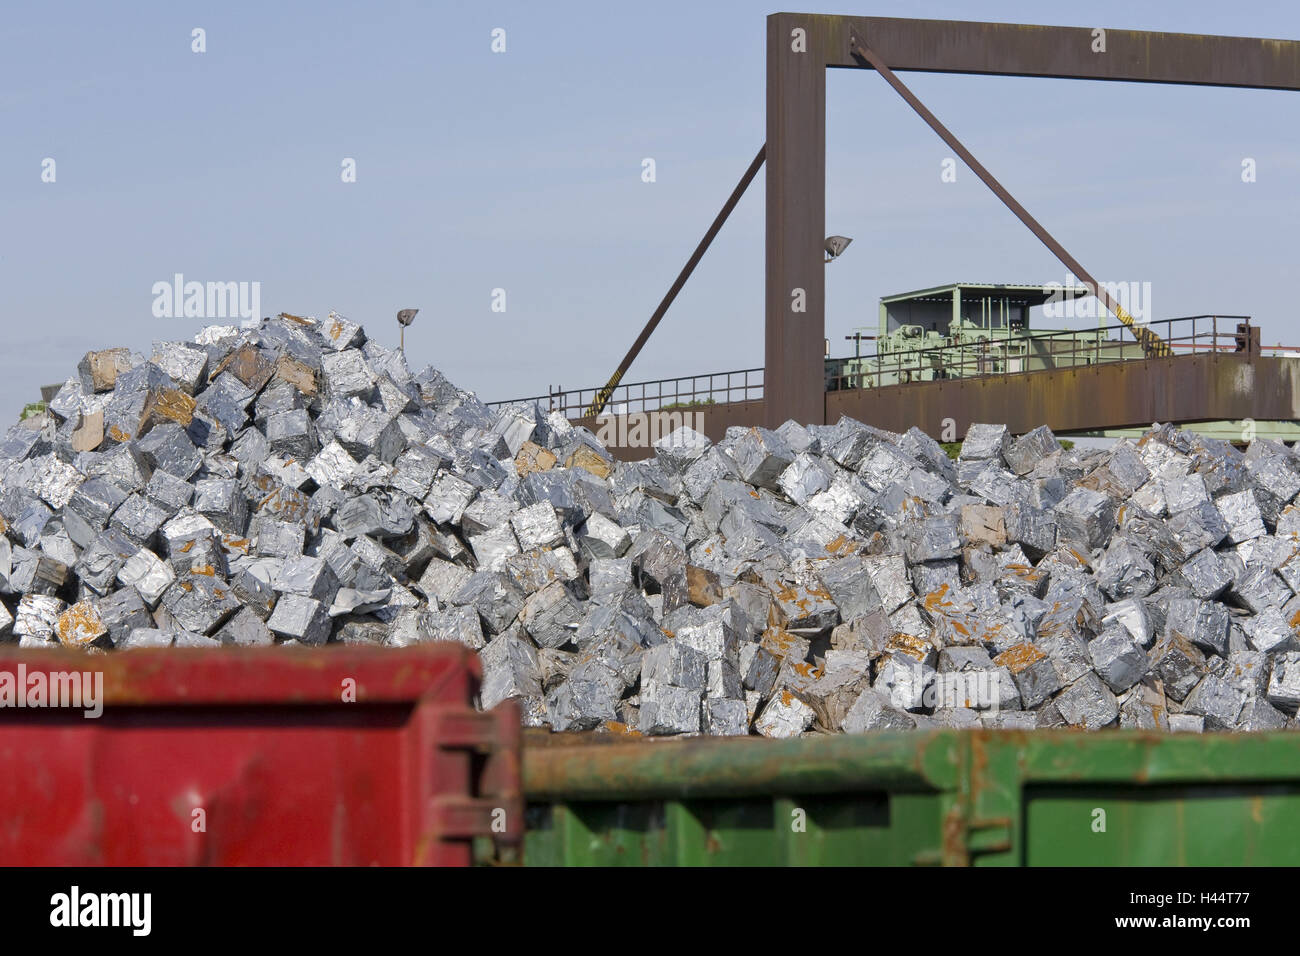 Collective place, steel, iron, scrap iron, recycling, Stock Photo